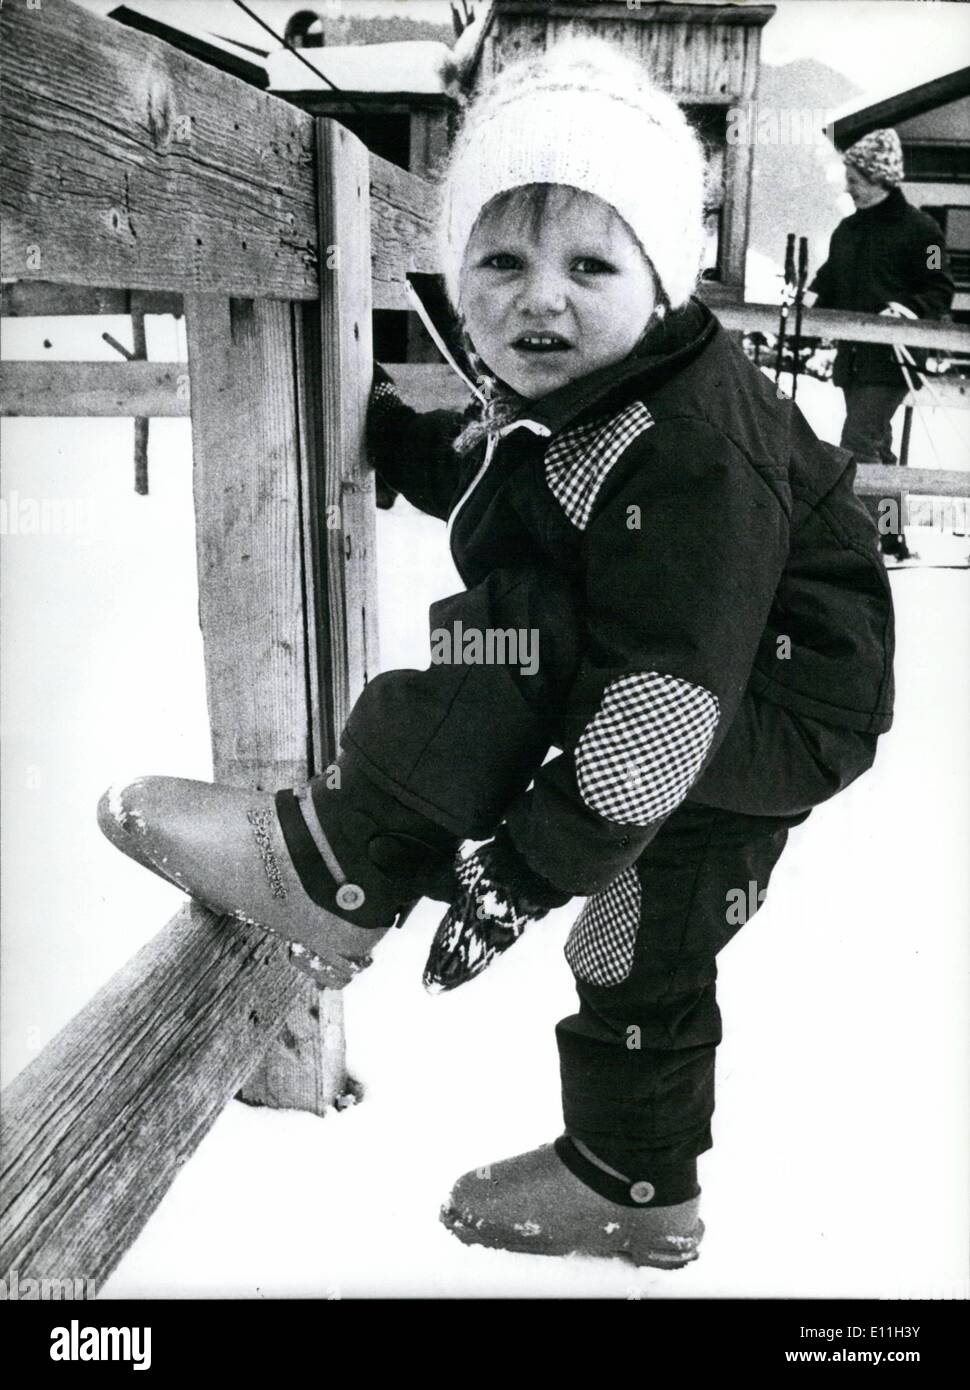 Feb. 23, 1978 - 23-26.2.1978 ''ISPO 78'' in Munich A ''mere child's play''... ... is it just for the most little ones, to pull on these modern ski boots alone, as this little (3 1/2 year old) ''ski hare'' demonstrates. ''Speedy is the name of the shoe, which now has been introduced in Munich at the ISPO 78 (9th International Sports Goods Fair). It has been the flexibility and side stability, which are demanded by orthopaedists. The very easy handling is guaranteed, for the shoe is to pull on from behind (shoehorn effect) and it has only one buckle as clasp Stock Photo